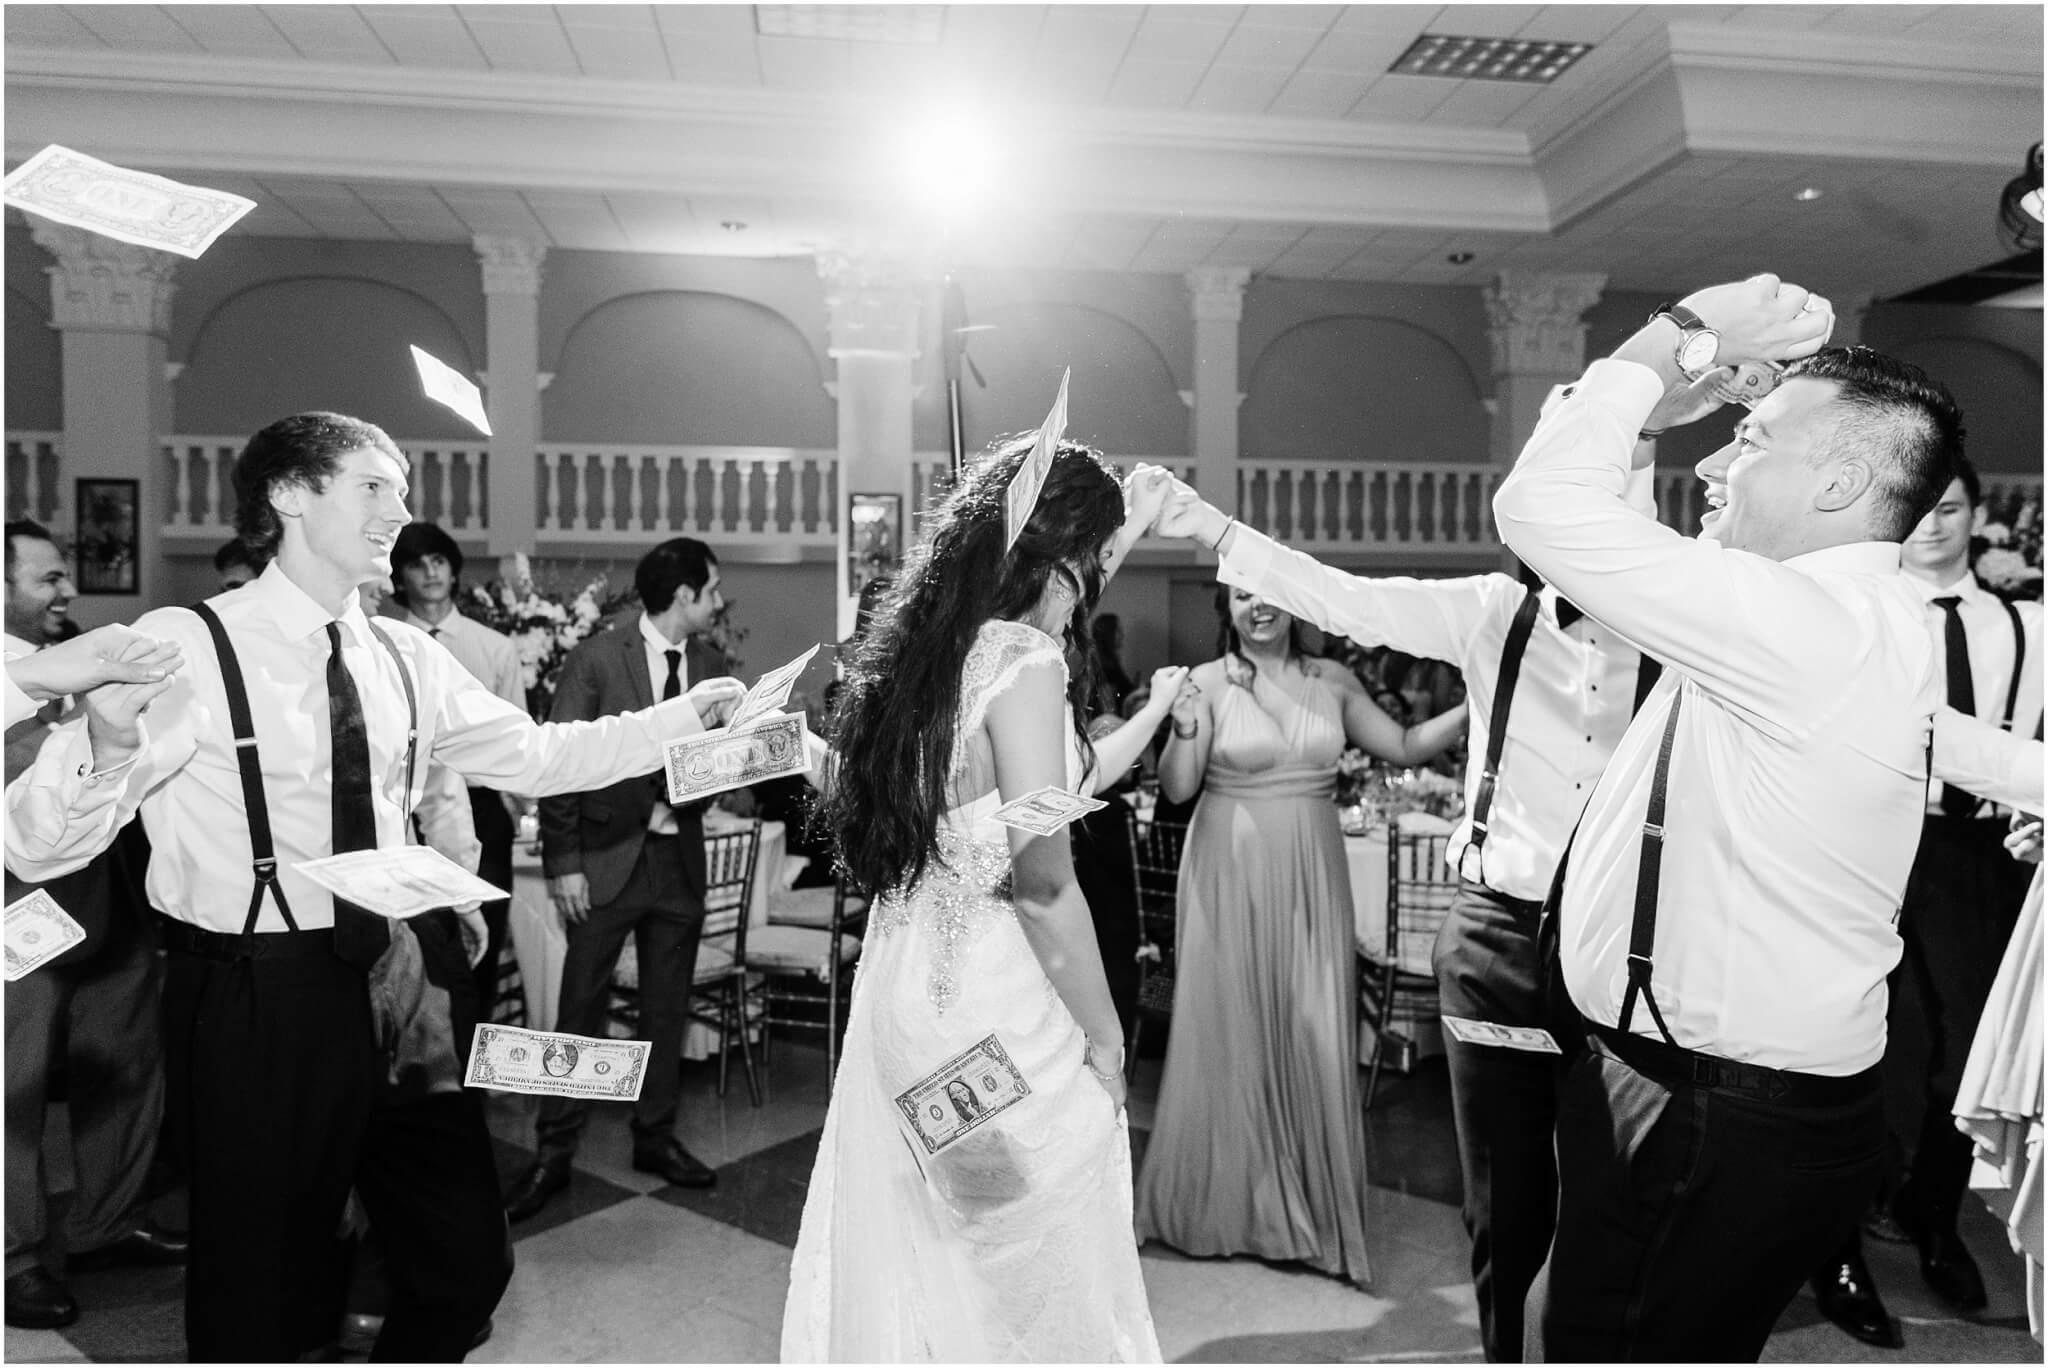 Greek wedding reception dancing with money thrown in the air